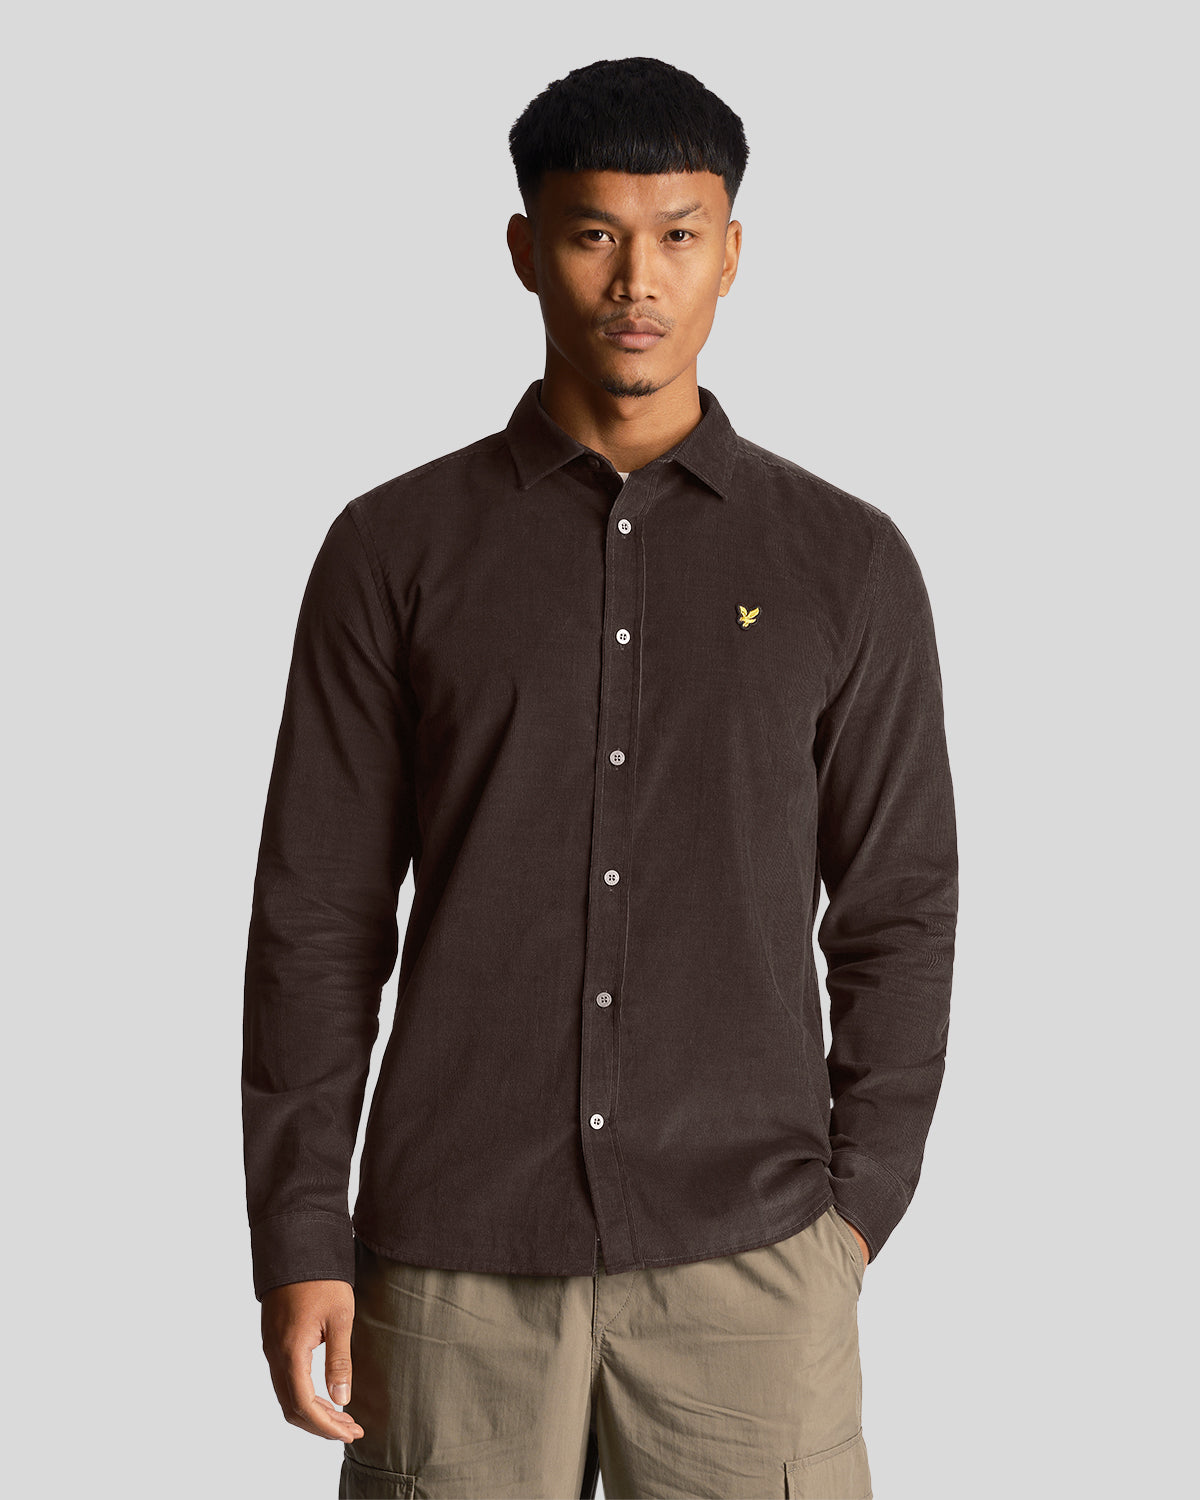 Lyle & Scott Mens Needle Cord Shirt in Olive - XXL product